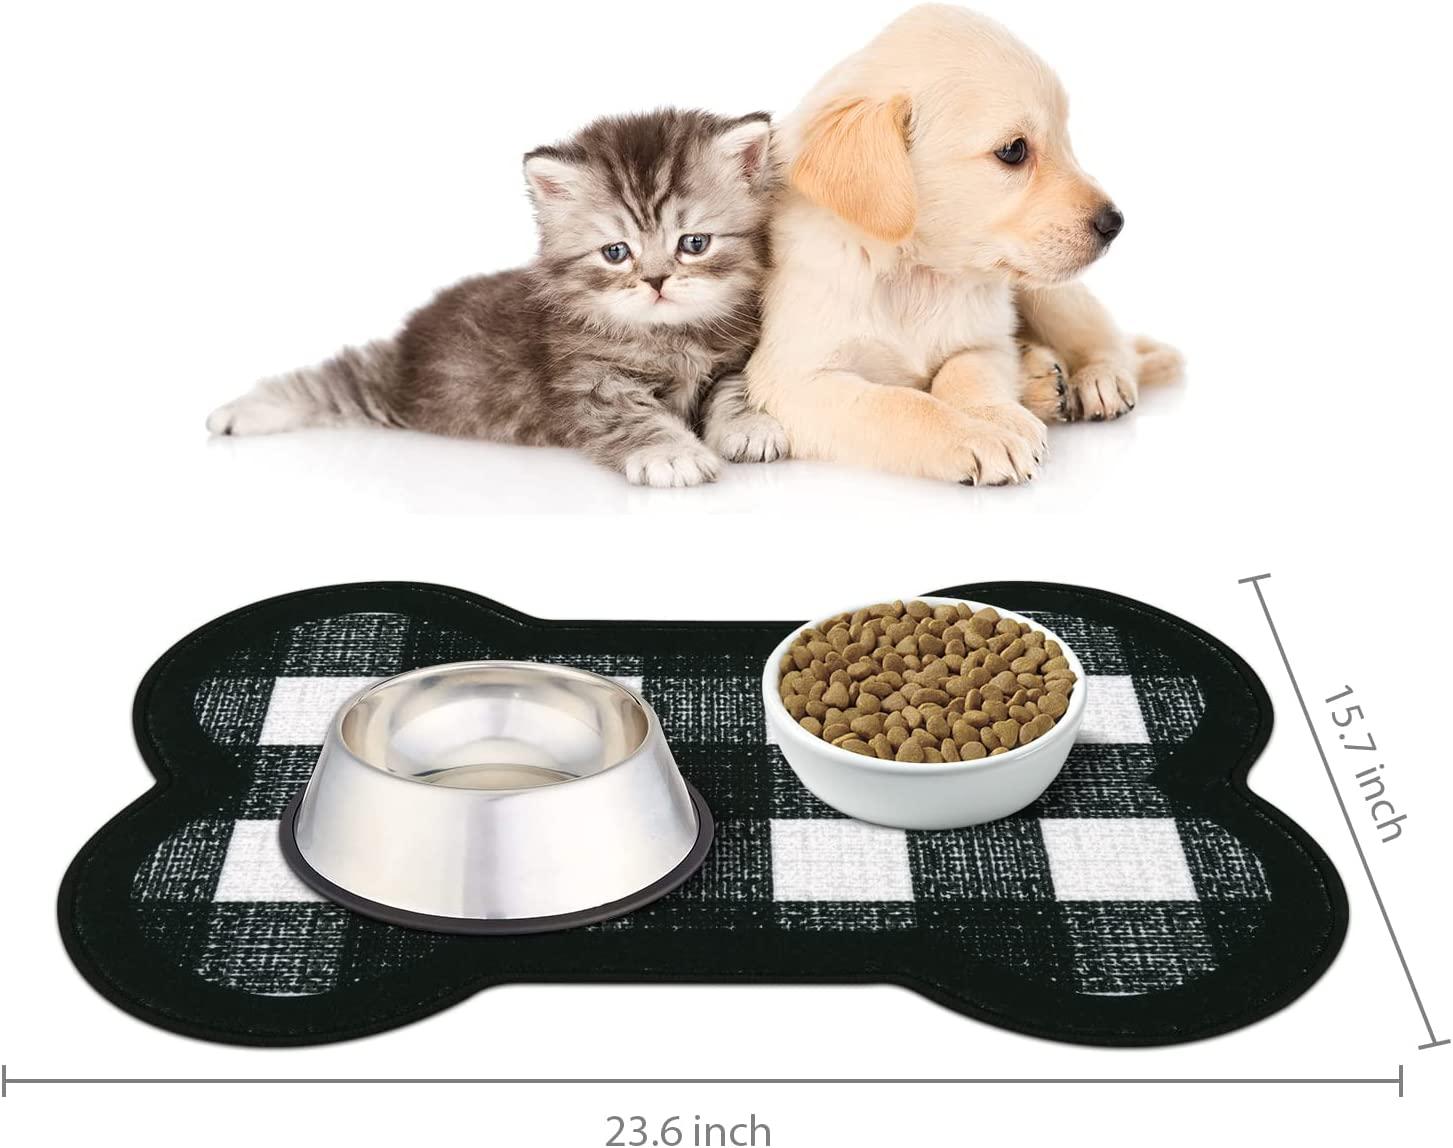 Yinuomo Non Slip Dog Food Mat, Waterproof Placemat for Cats Bowl and Water,  Easy to Clean Absorbent Feeding Mats for Pet Dog Cat (Machine Washable),  Large 16'' x 24'' Bone Shape